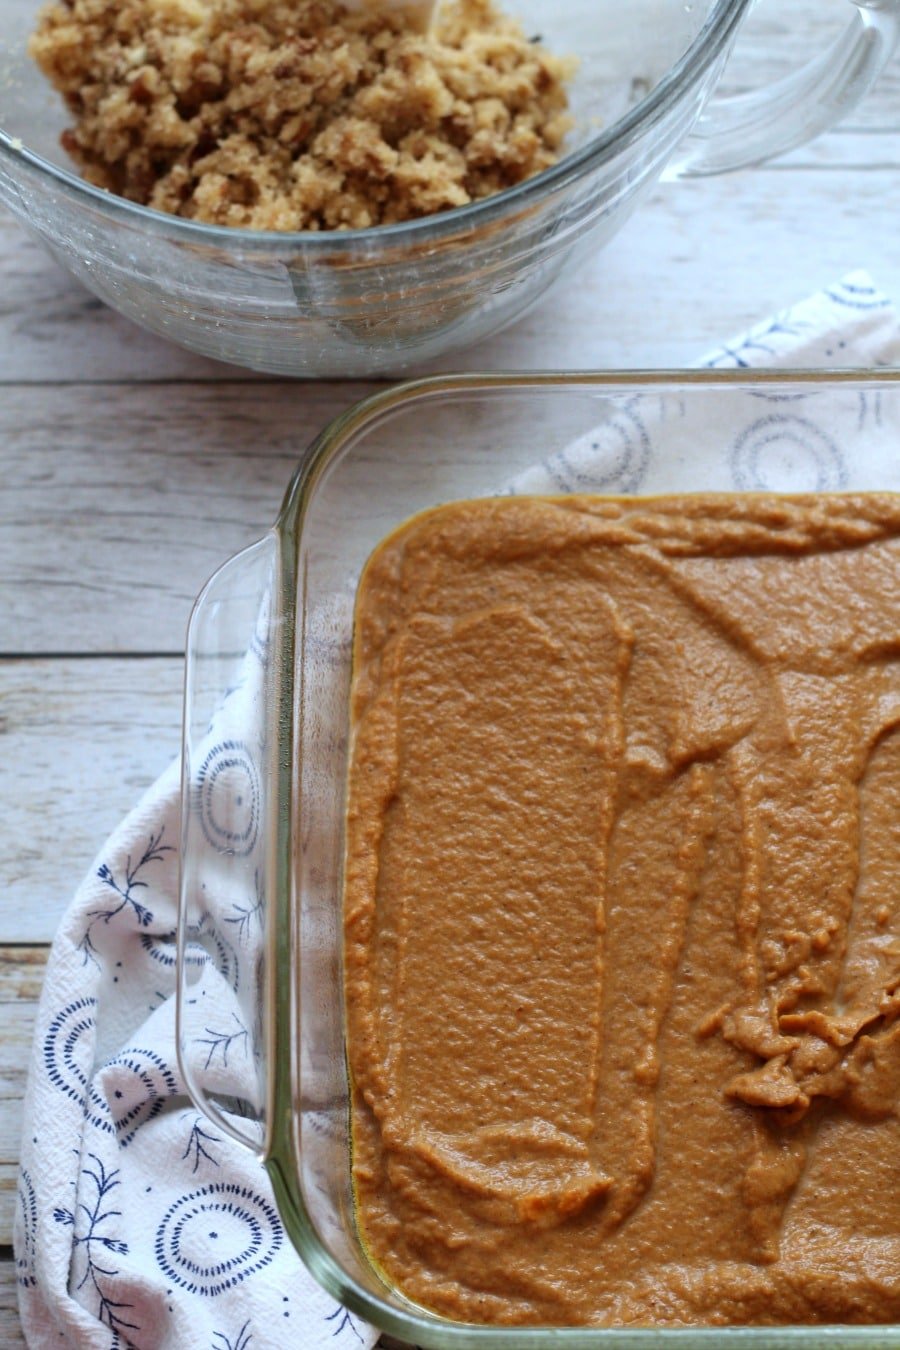 Make our Low Carb Pumpkin Crisp this holiday season for a delicious and keto-friendly dessert! This has tons of flavor and still stays within your macros!